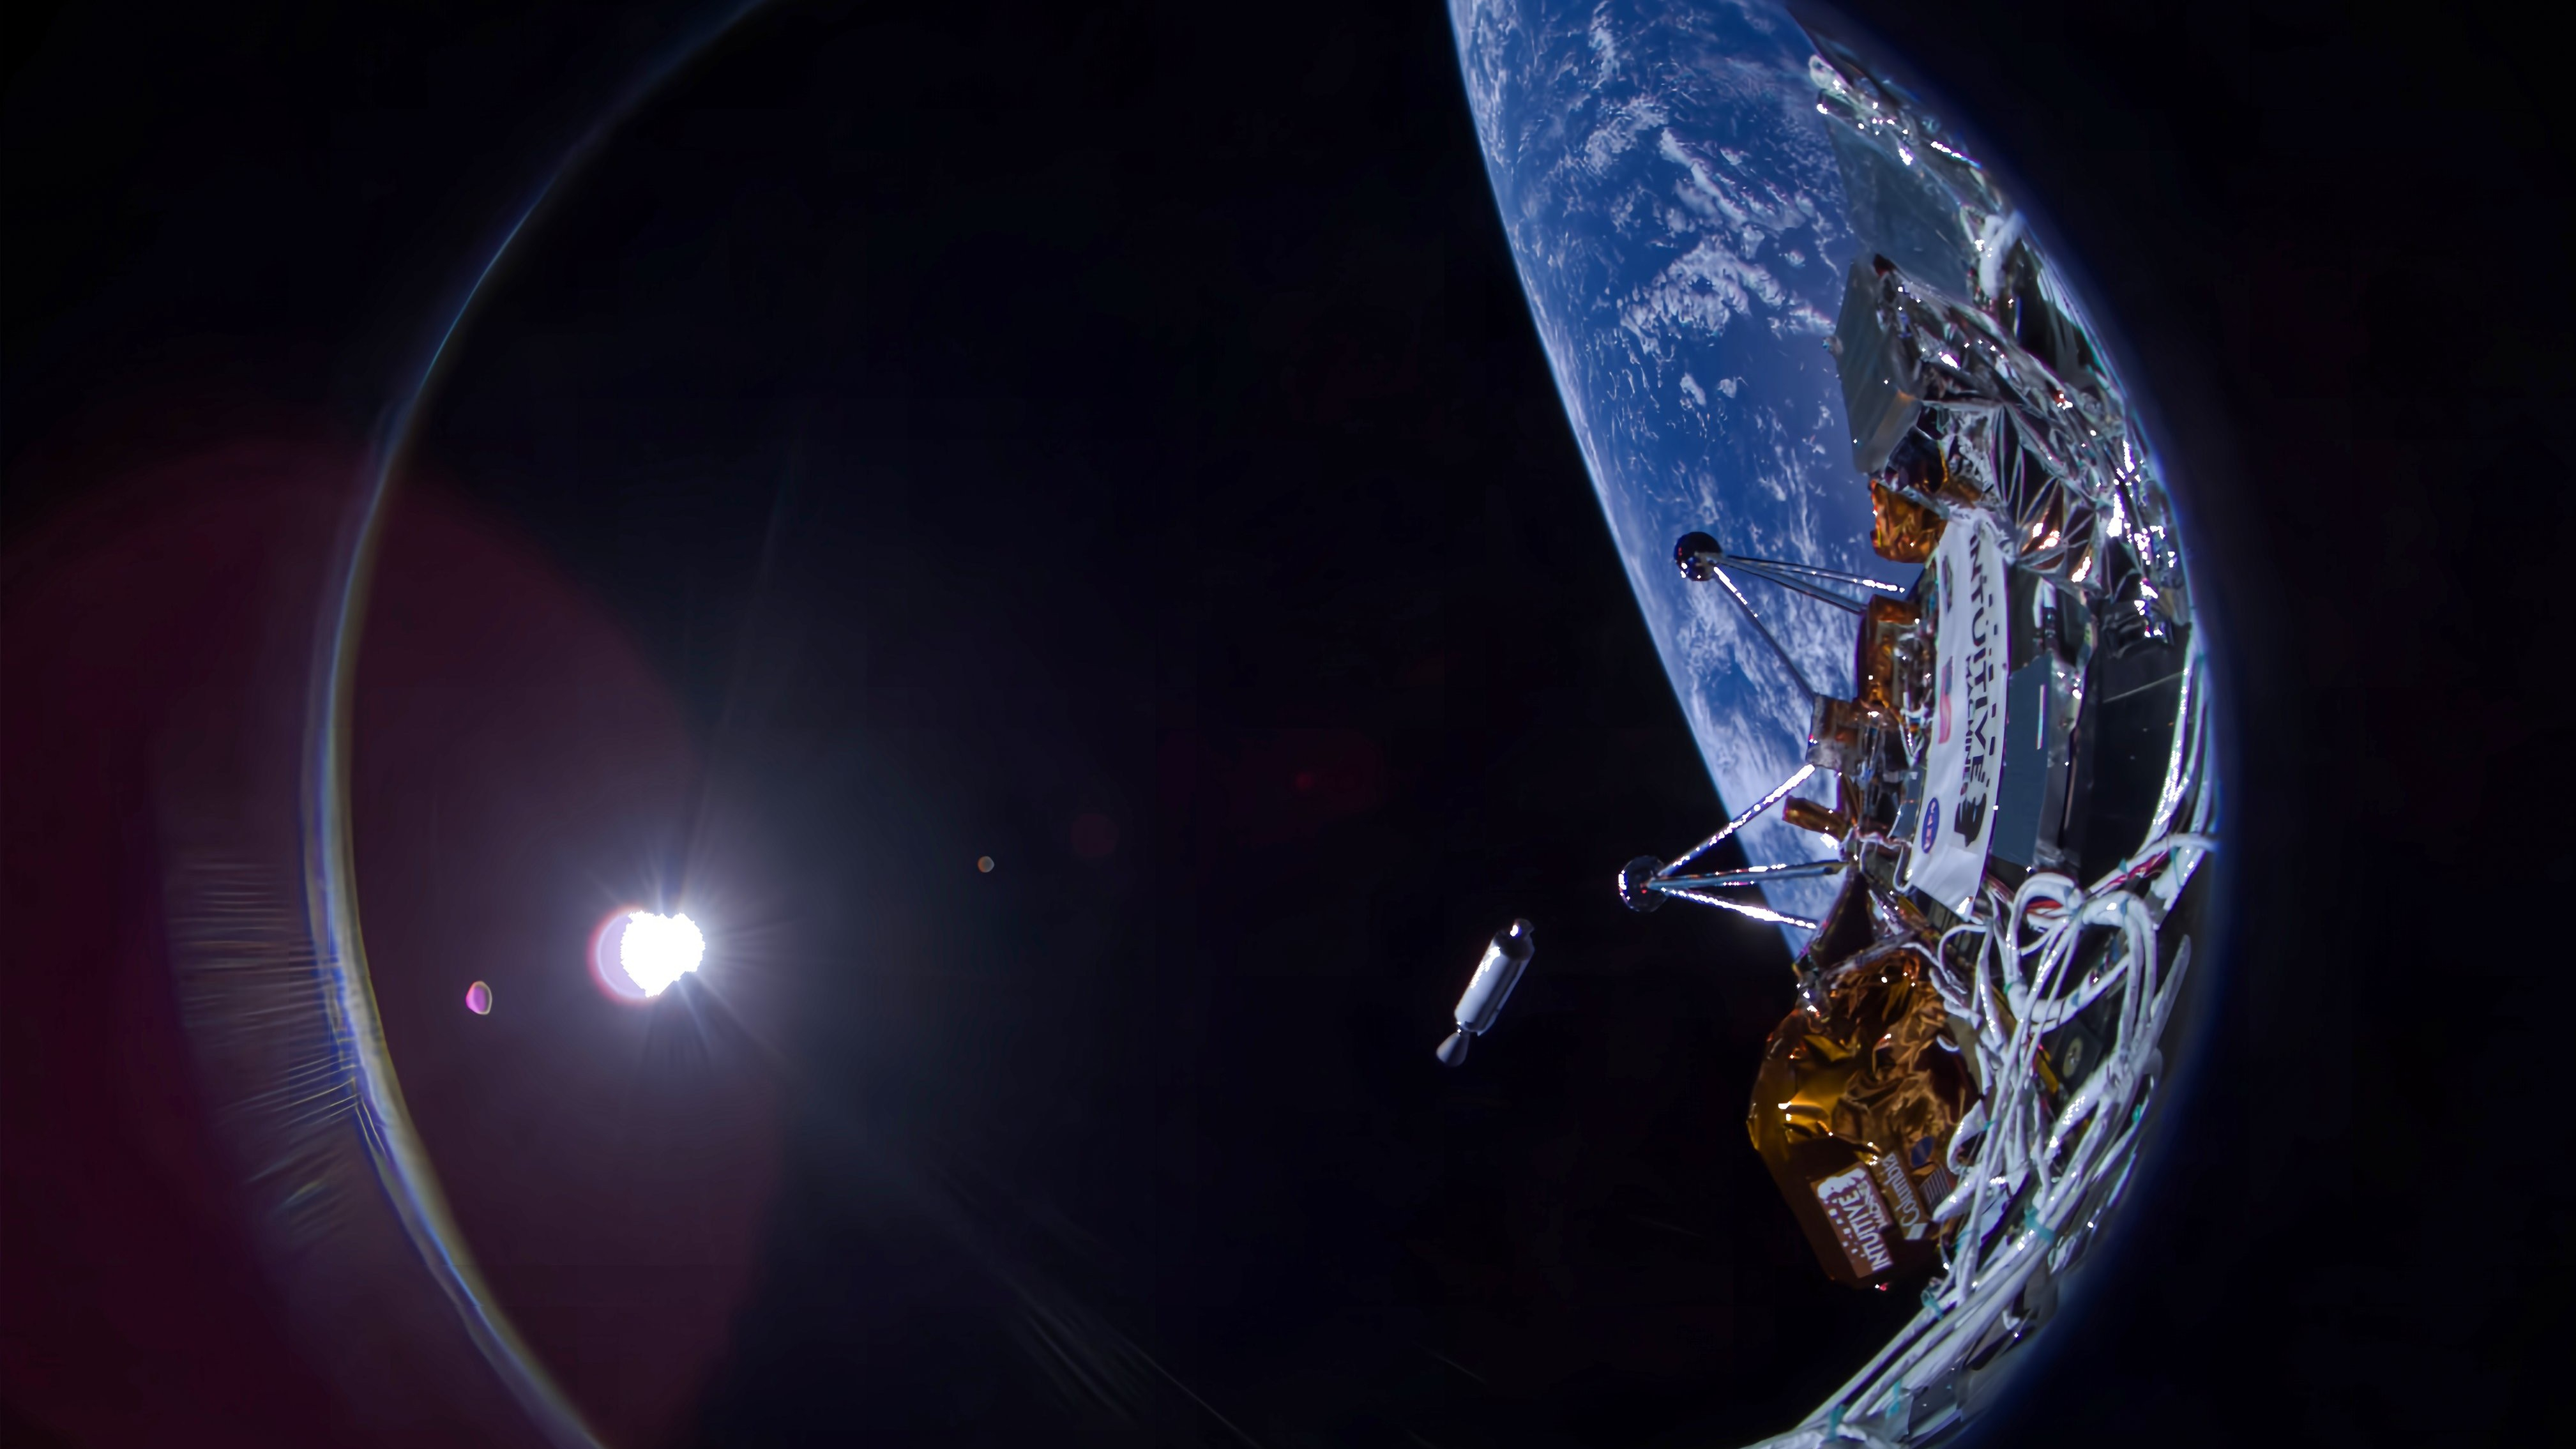 closeup of a spacecraft selfie showing gray and gold-wrapped components, with the curve of earth and the distant sun in the background.